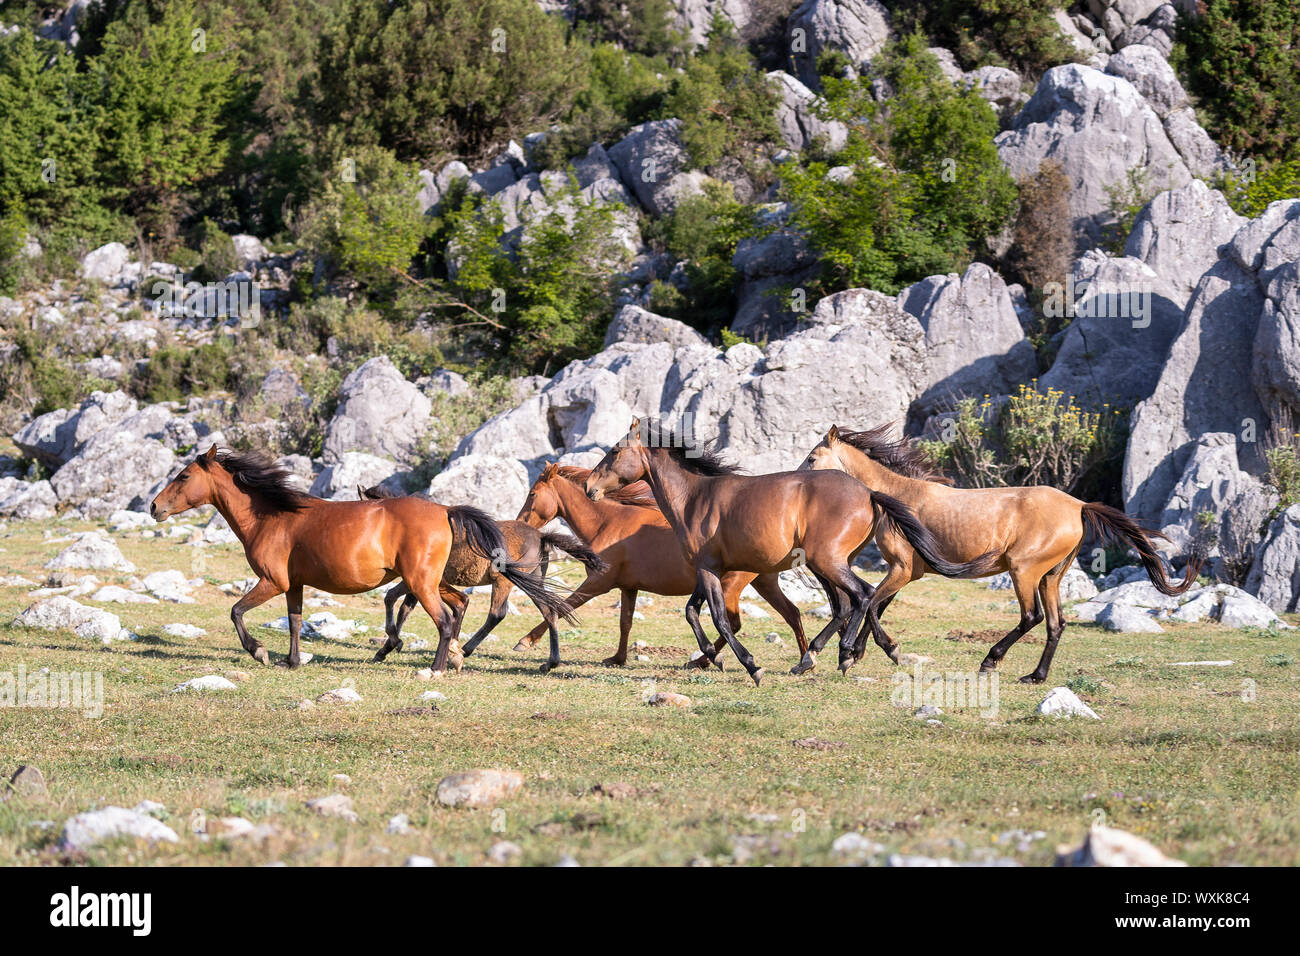 Feral horse, wild horse. Herd of mares galloping in landscape. Turkey Stock Photo